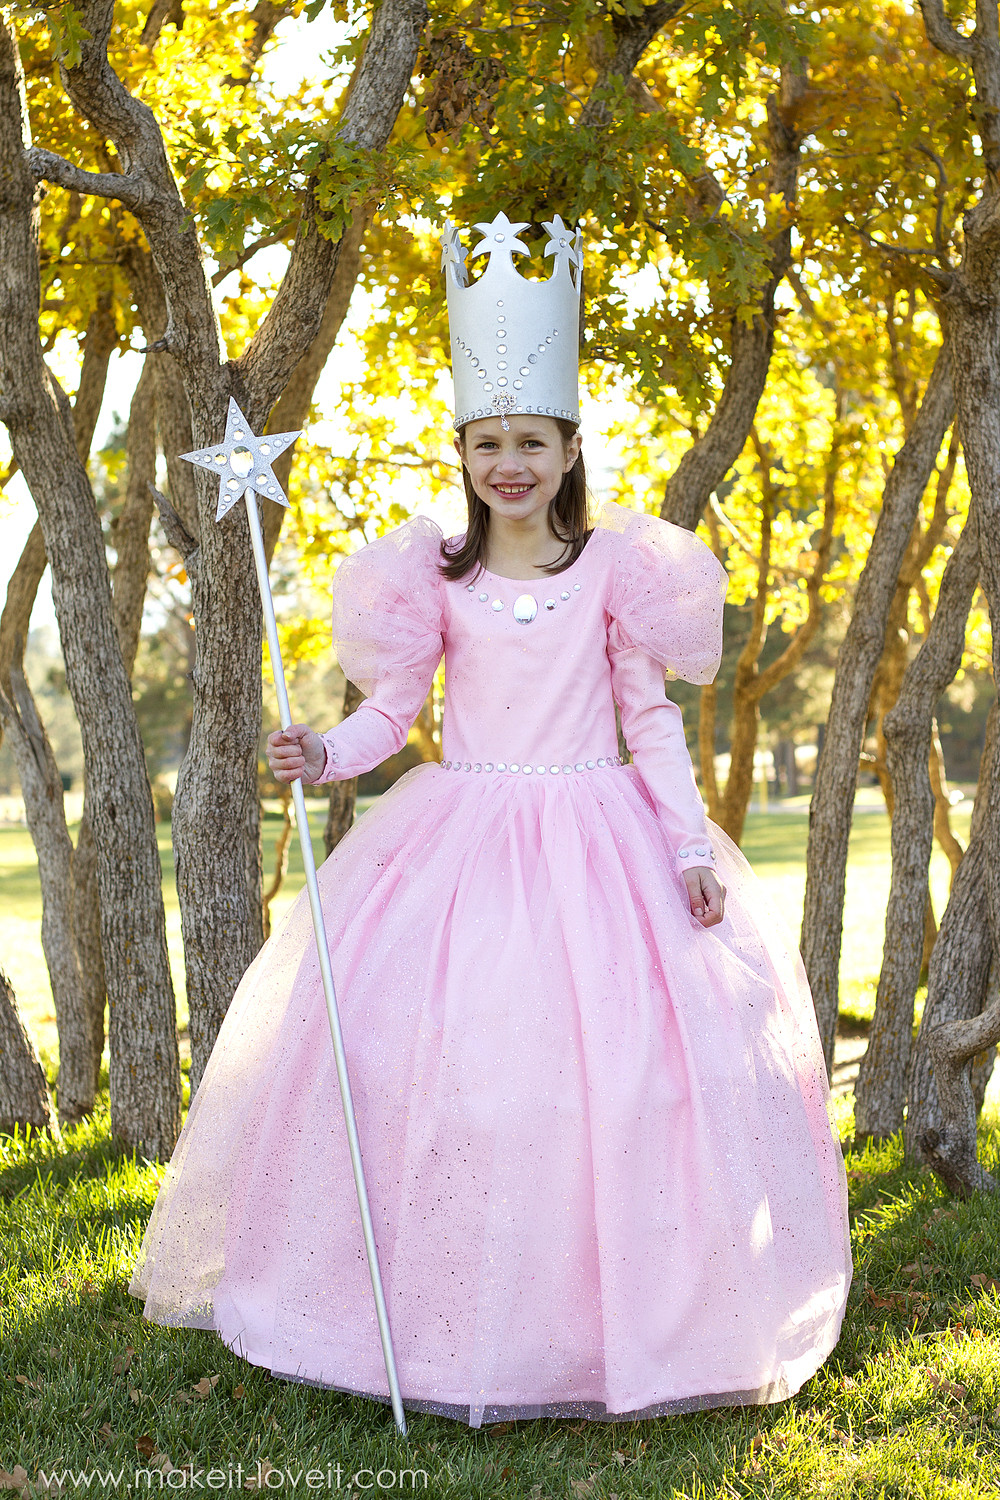 DIY Wizard Of Oz Costume
 Glinda the Good Witch from "Wizard of Oz"